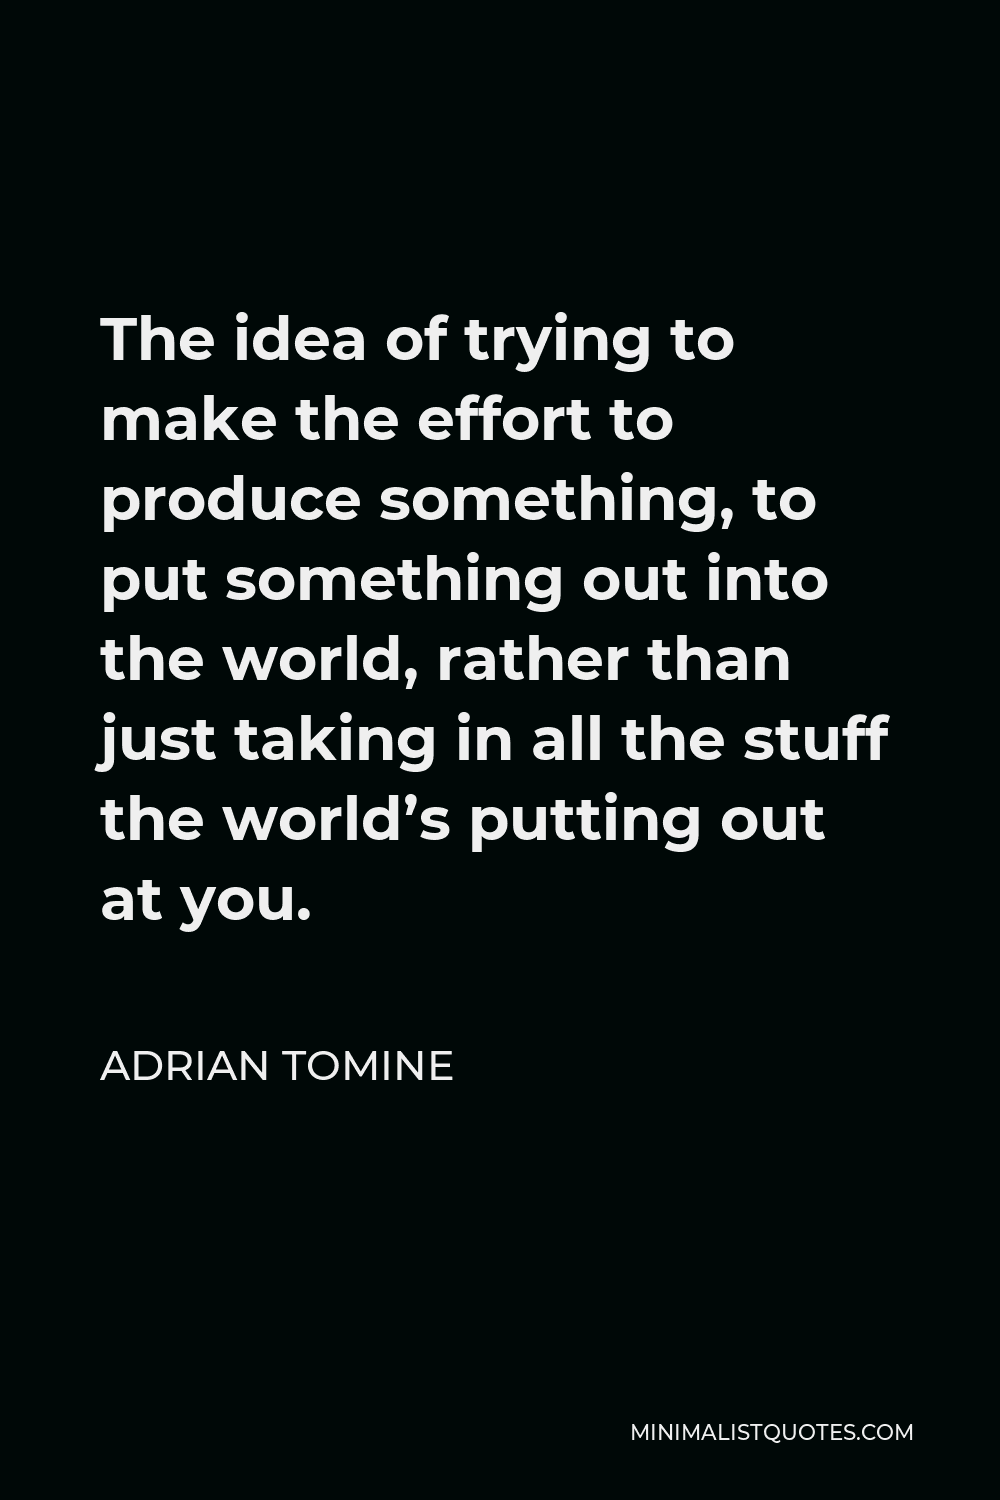 Adrian Tomine Quote - The idea of trying to make the effort to produce something, to put something out into the world, rather than just taking in all the stuff the world’s putting out at you.